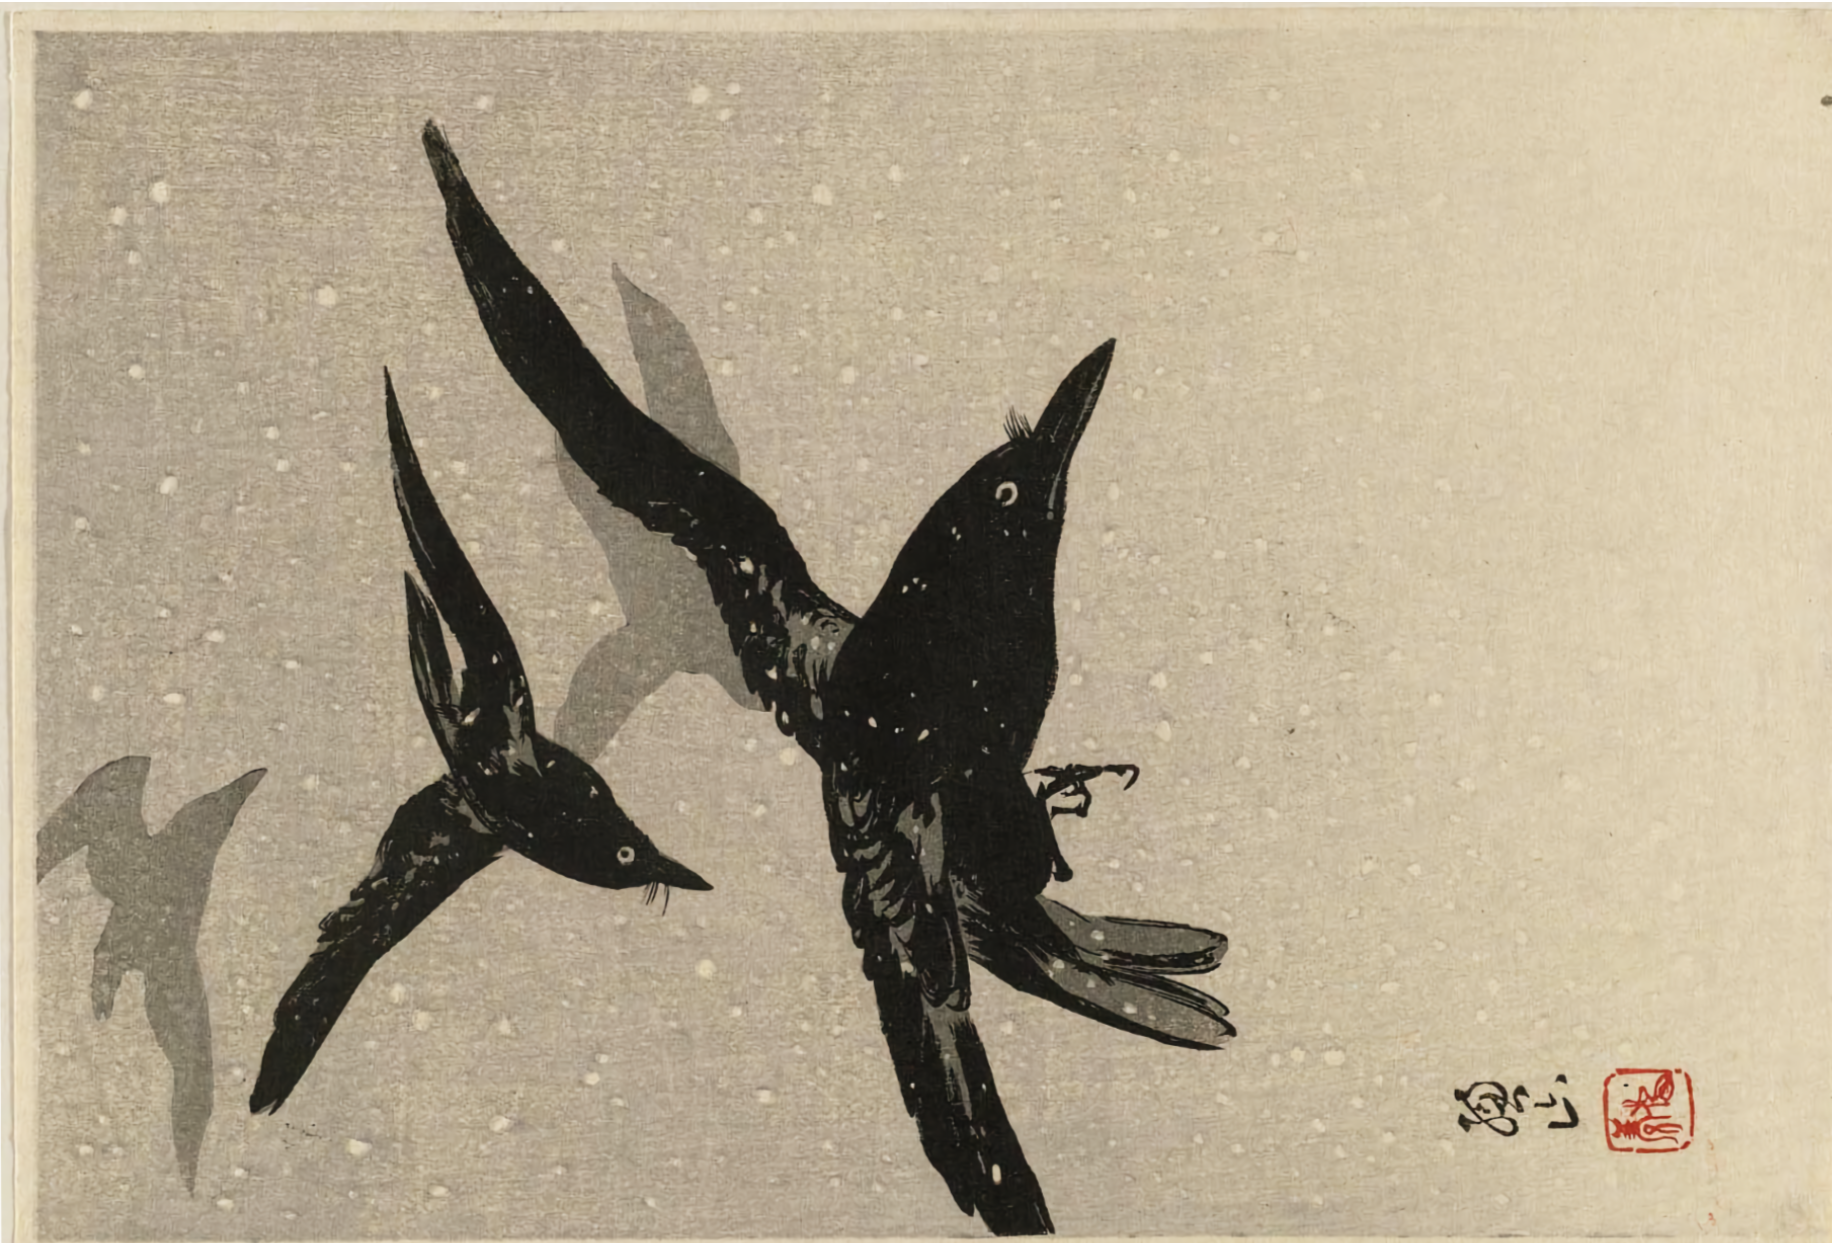 Crows Flying in a Snowstorm by Ito Sozan, 1920s - Postcard Classic Postcard Media 1 of 2